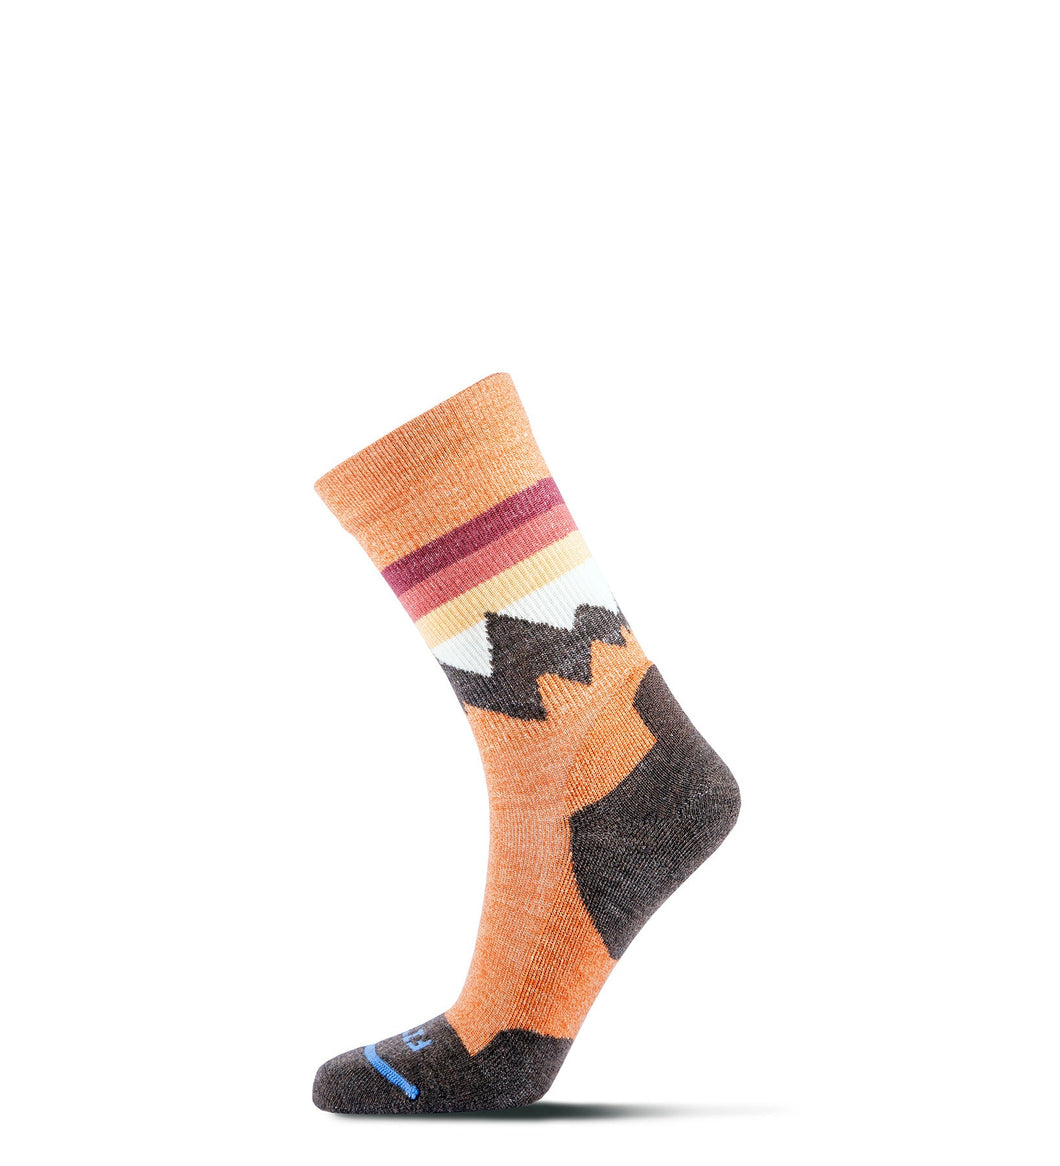 orange sock with mountain design and brown heel and toe